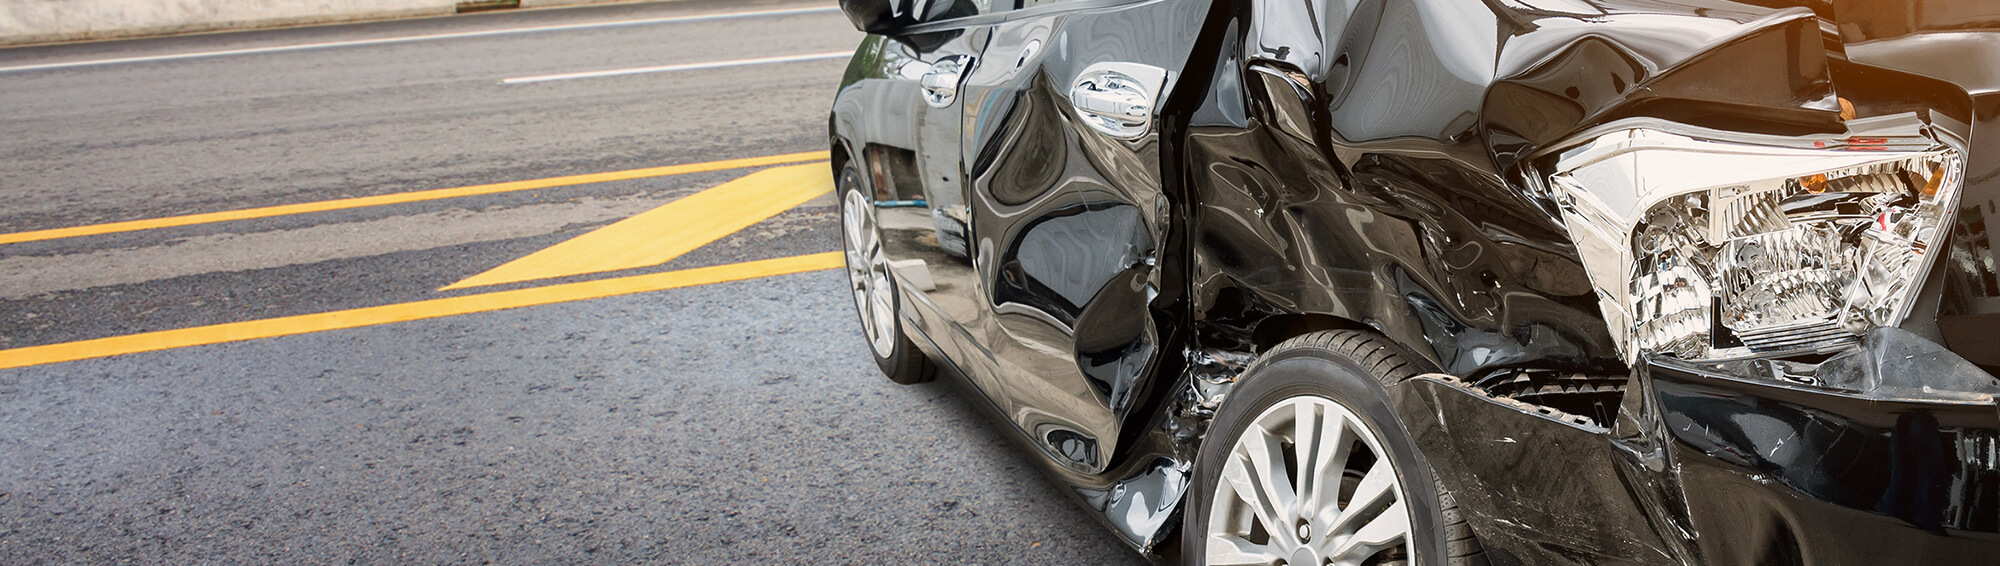 Hurt in a Crash? You May Be Eligible for Compensation through Your Auto Insurance